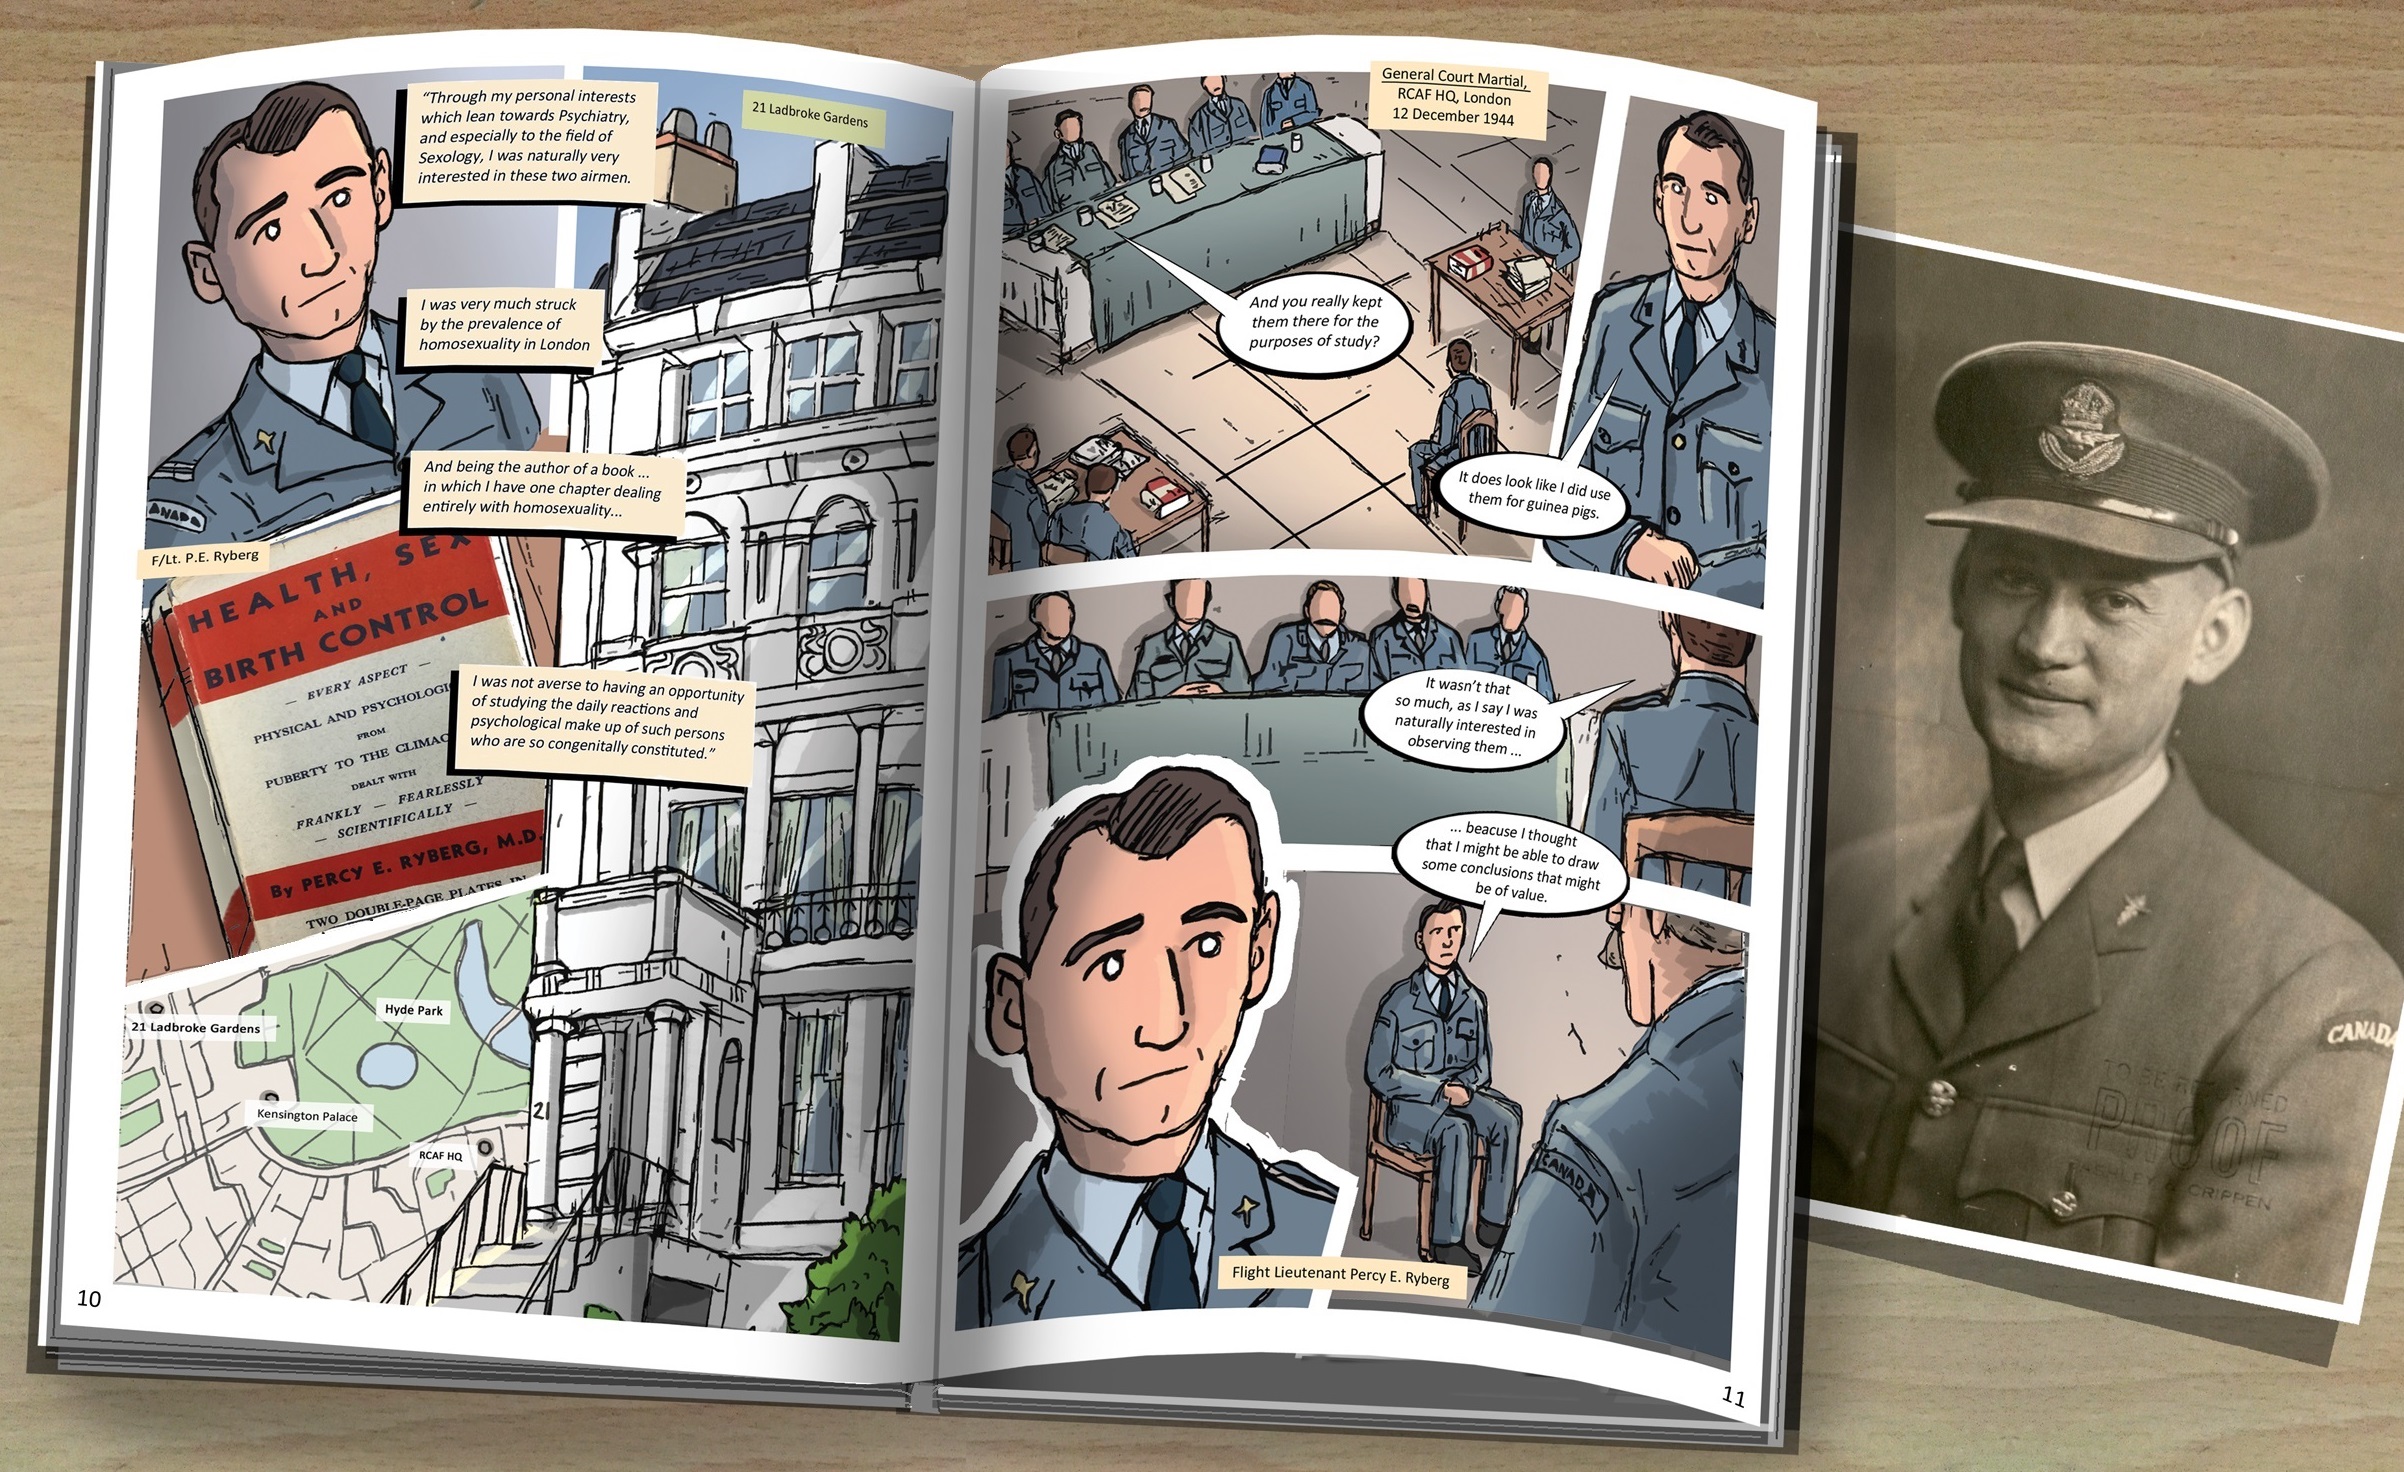 comic book showing Dr. Ryberg